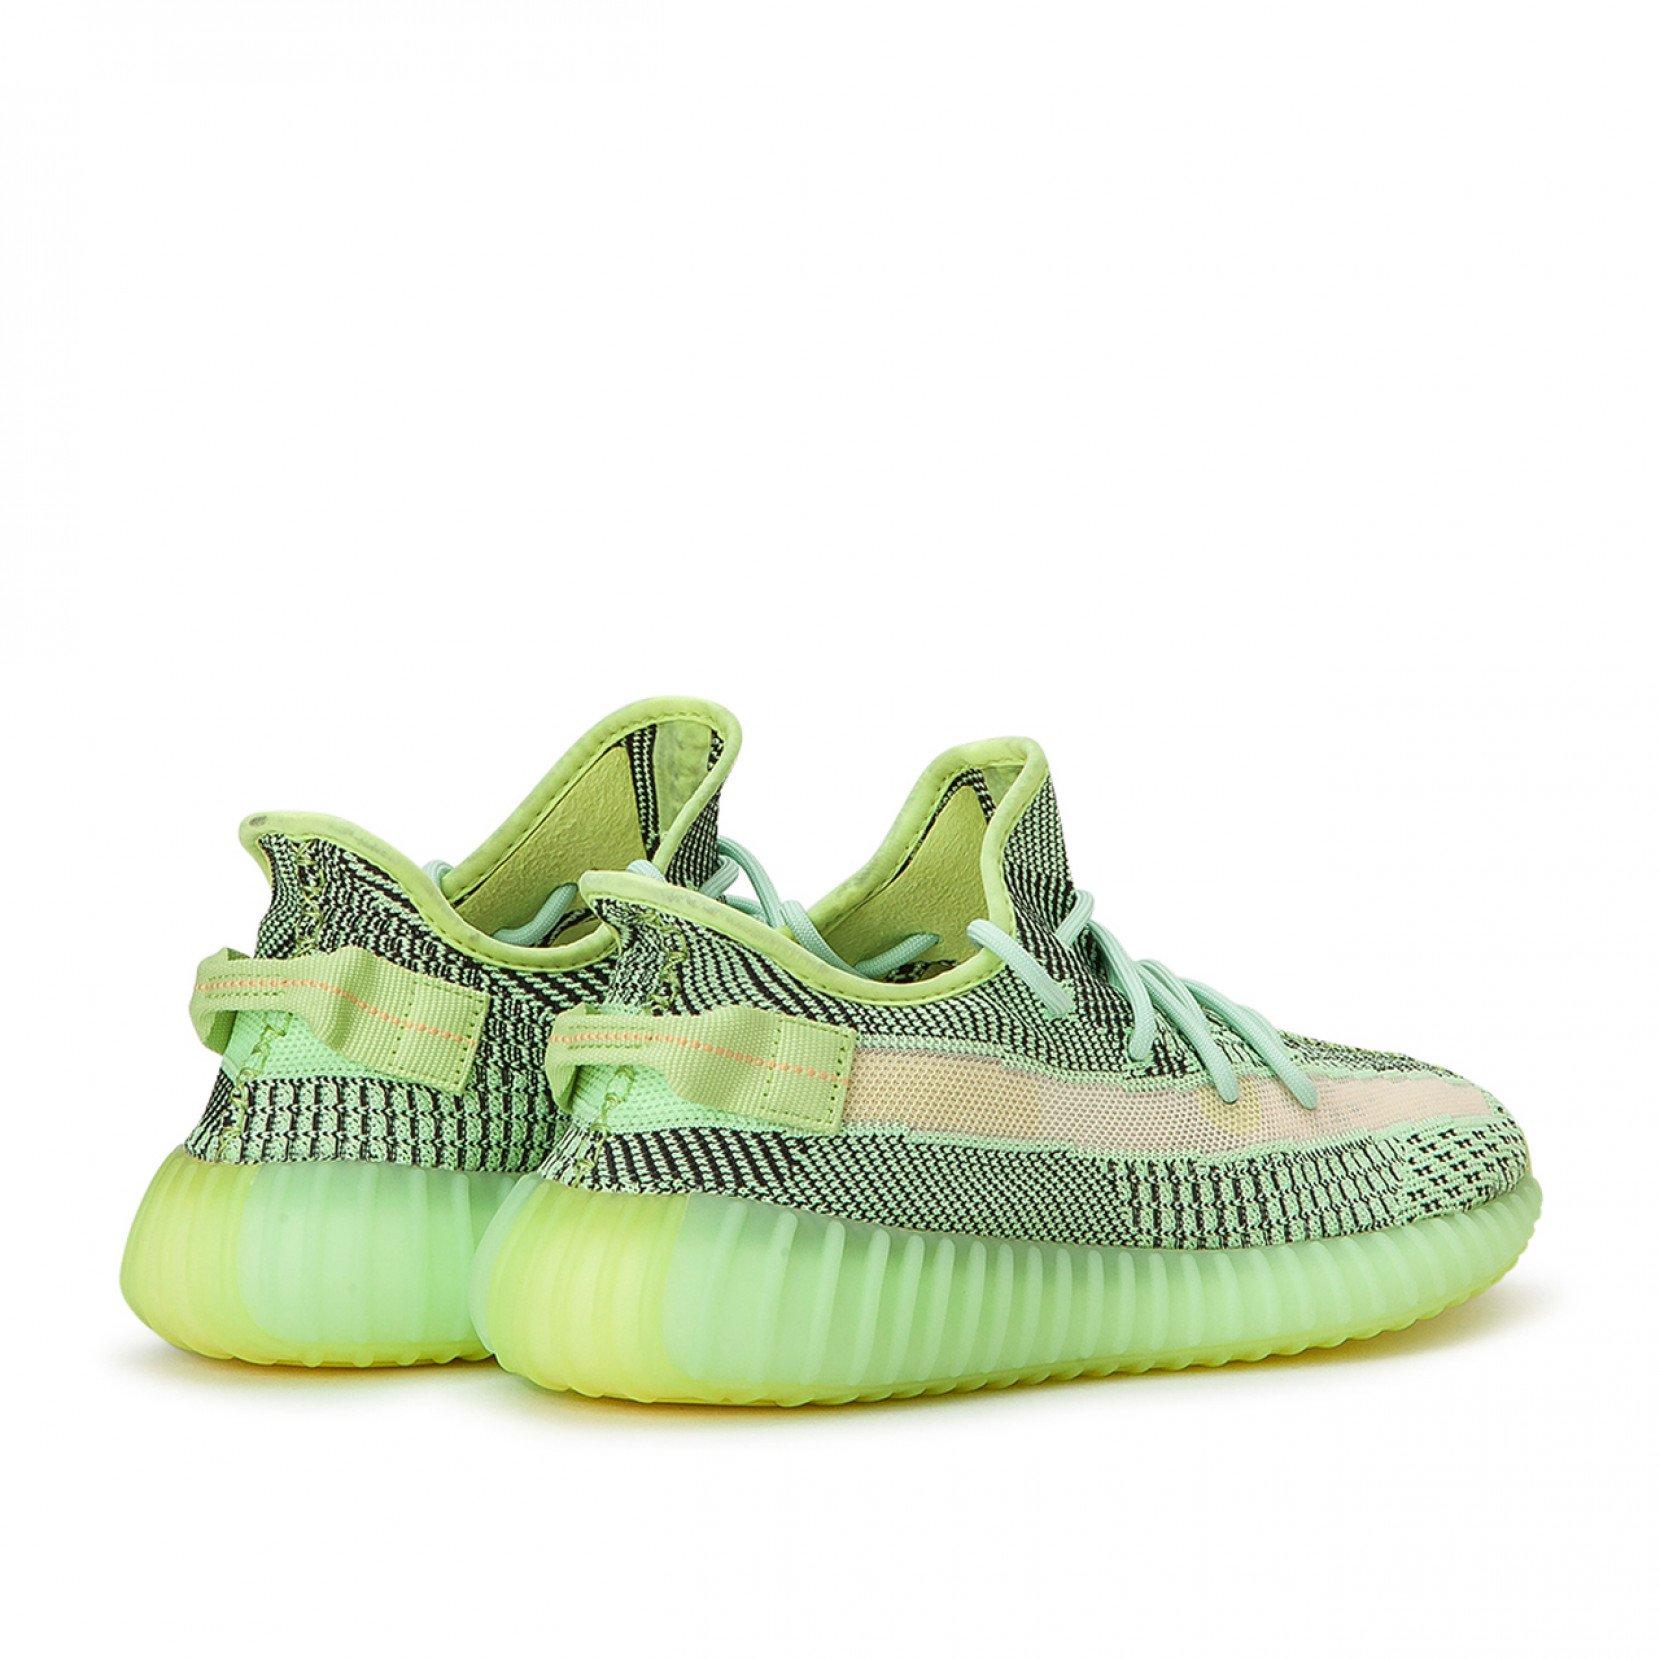 adidas Yeezy Boost 350 V2 ' in Neon Yellow (Green) for Men - Lyst